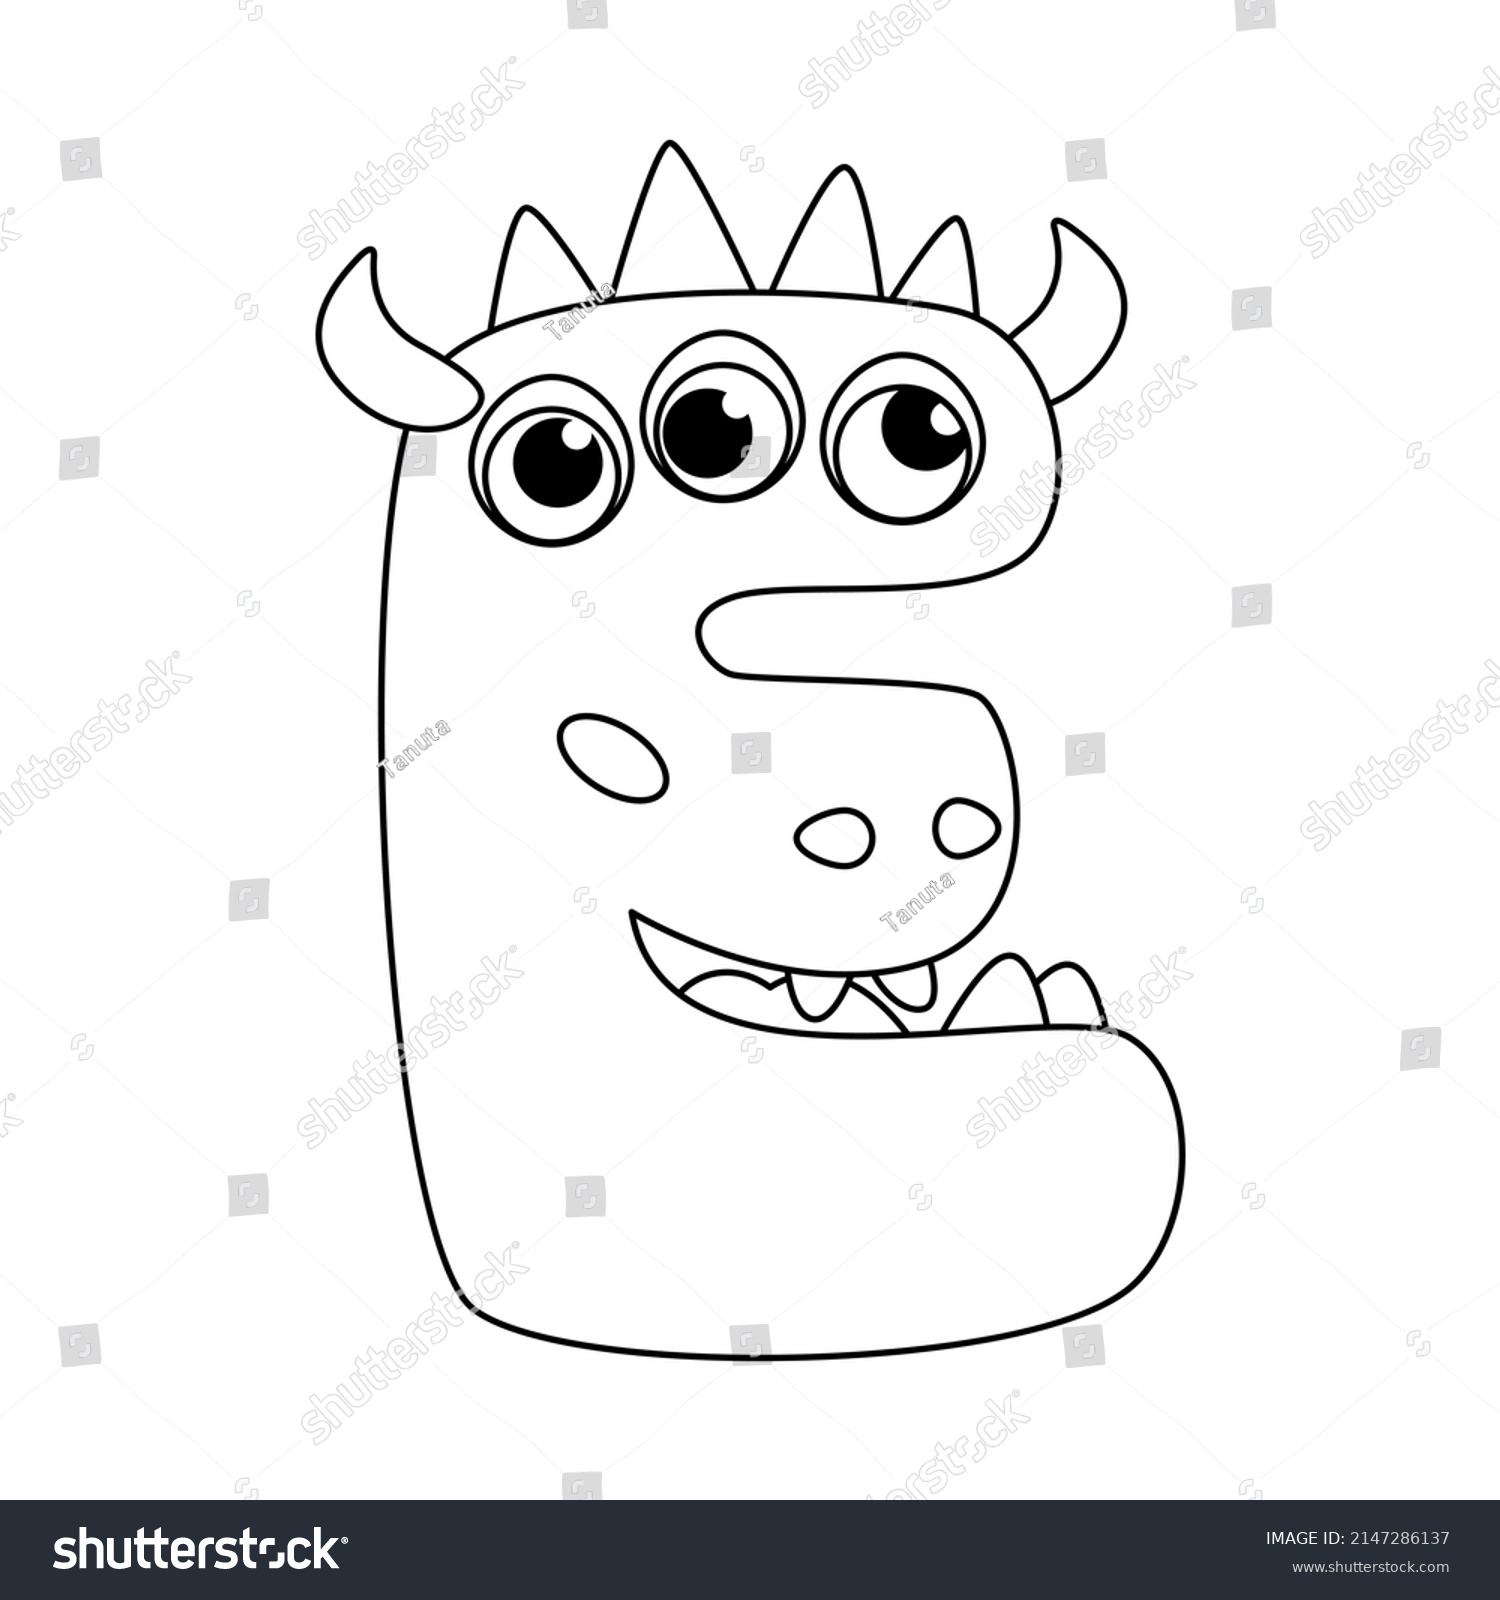 Monster Alphabet Coloring Page Book Coloring Stock Vector (Royalty Free ...